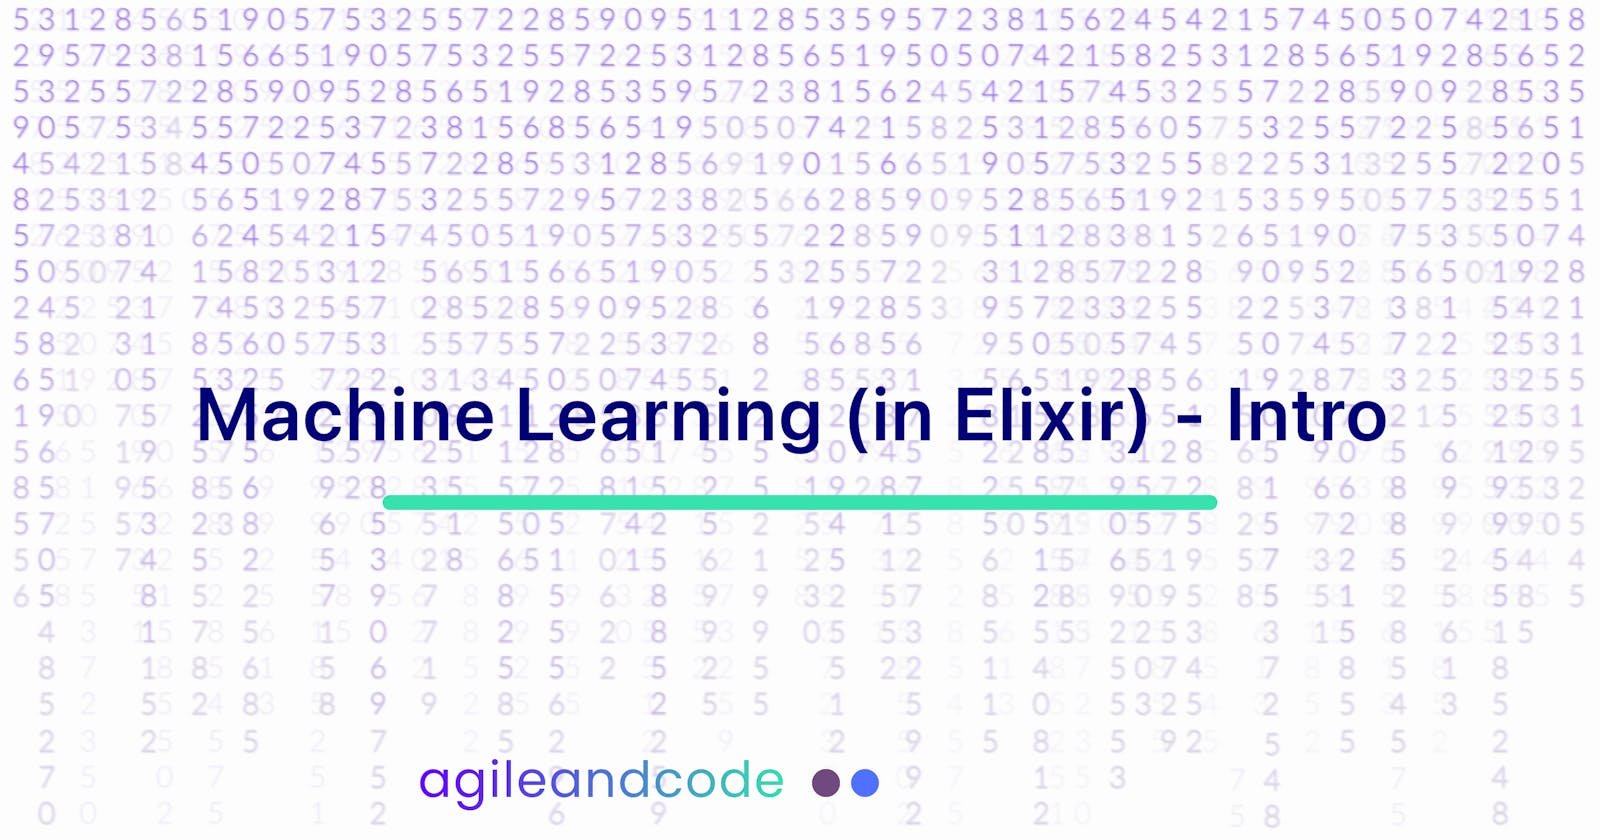 Machine Learning (in Elixir) - Intro